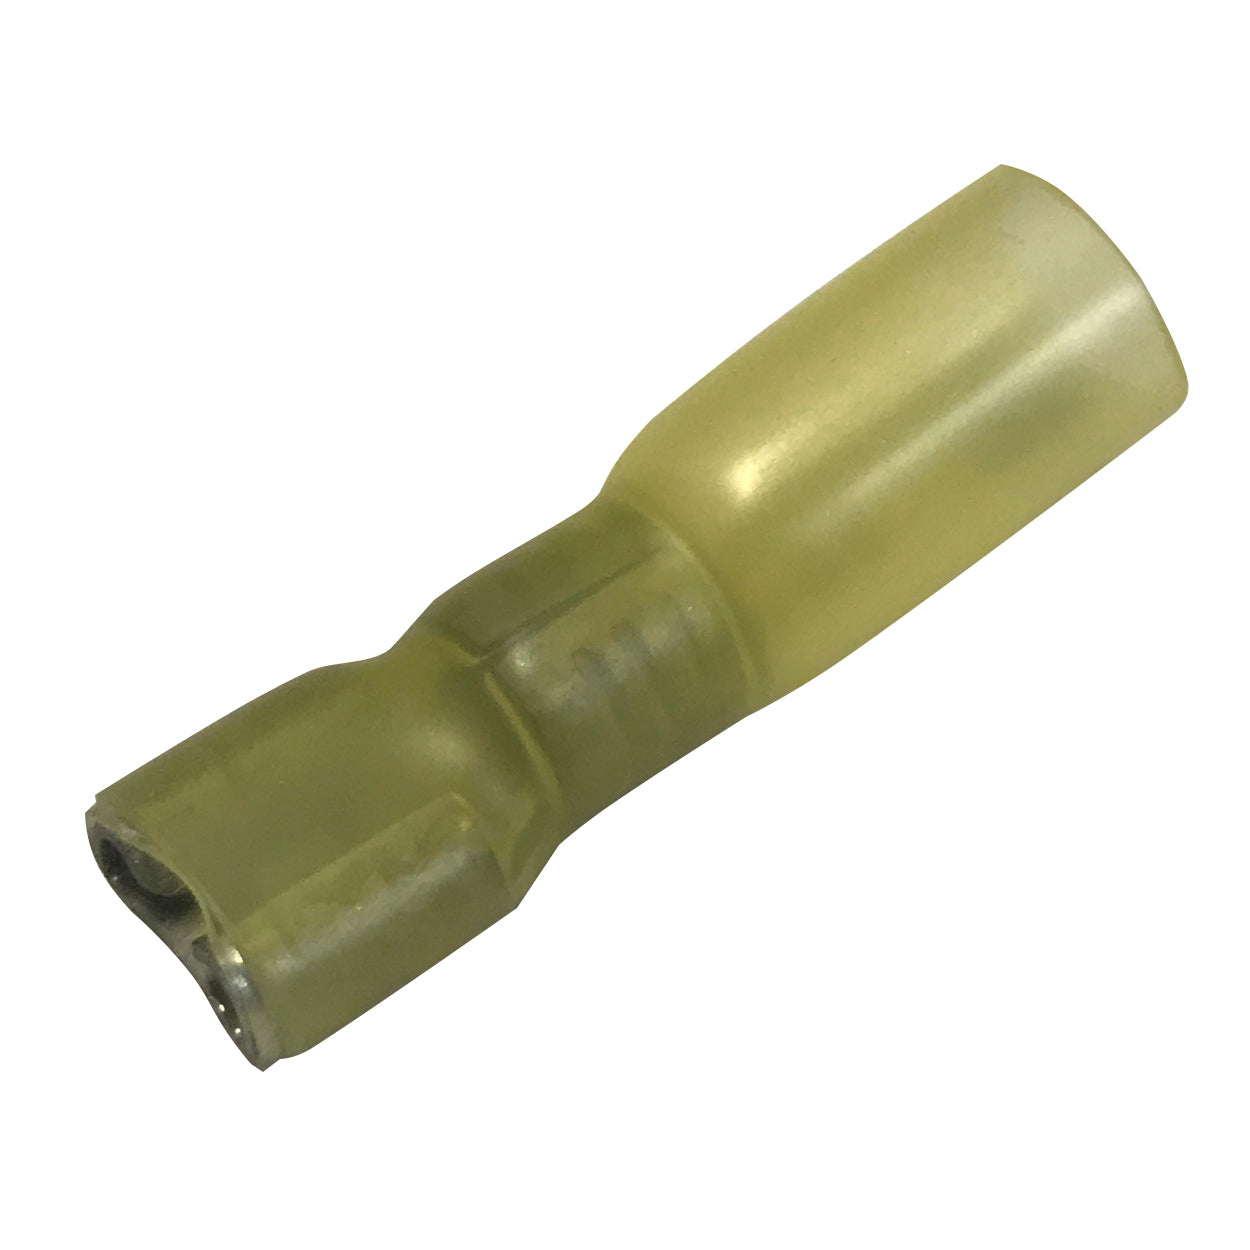 Heat Shrink & Crimp Yellow Fully Insulated Female Quick Disconnect 8 Gauge .250 Tab - 10 Pack